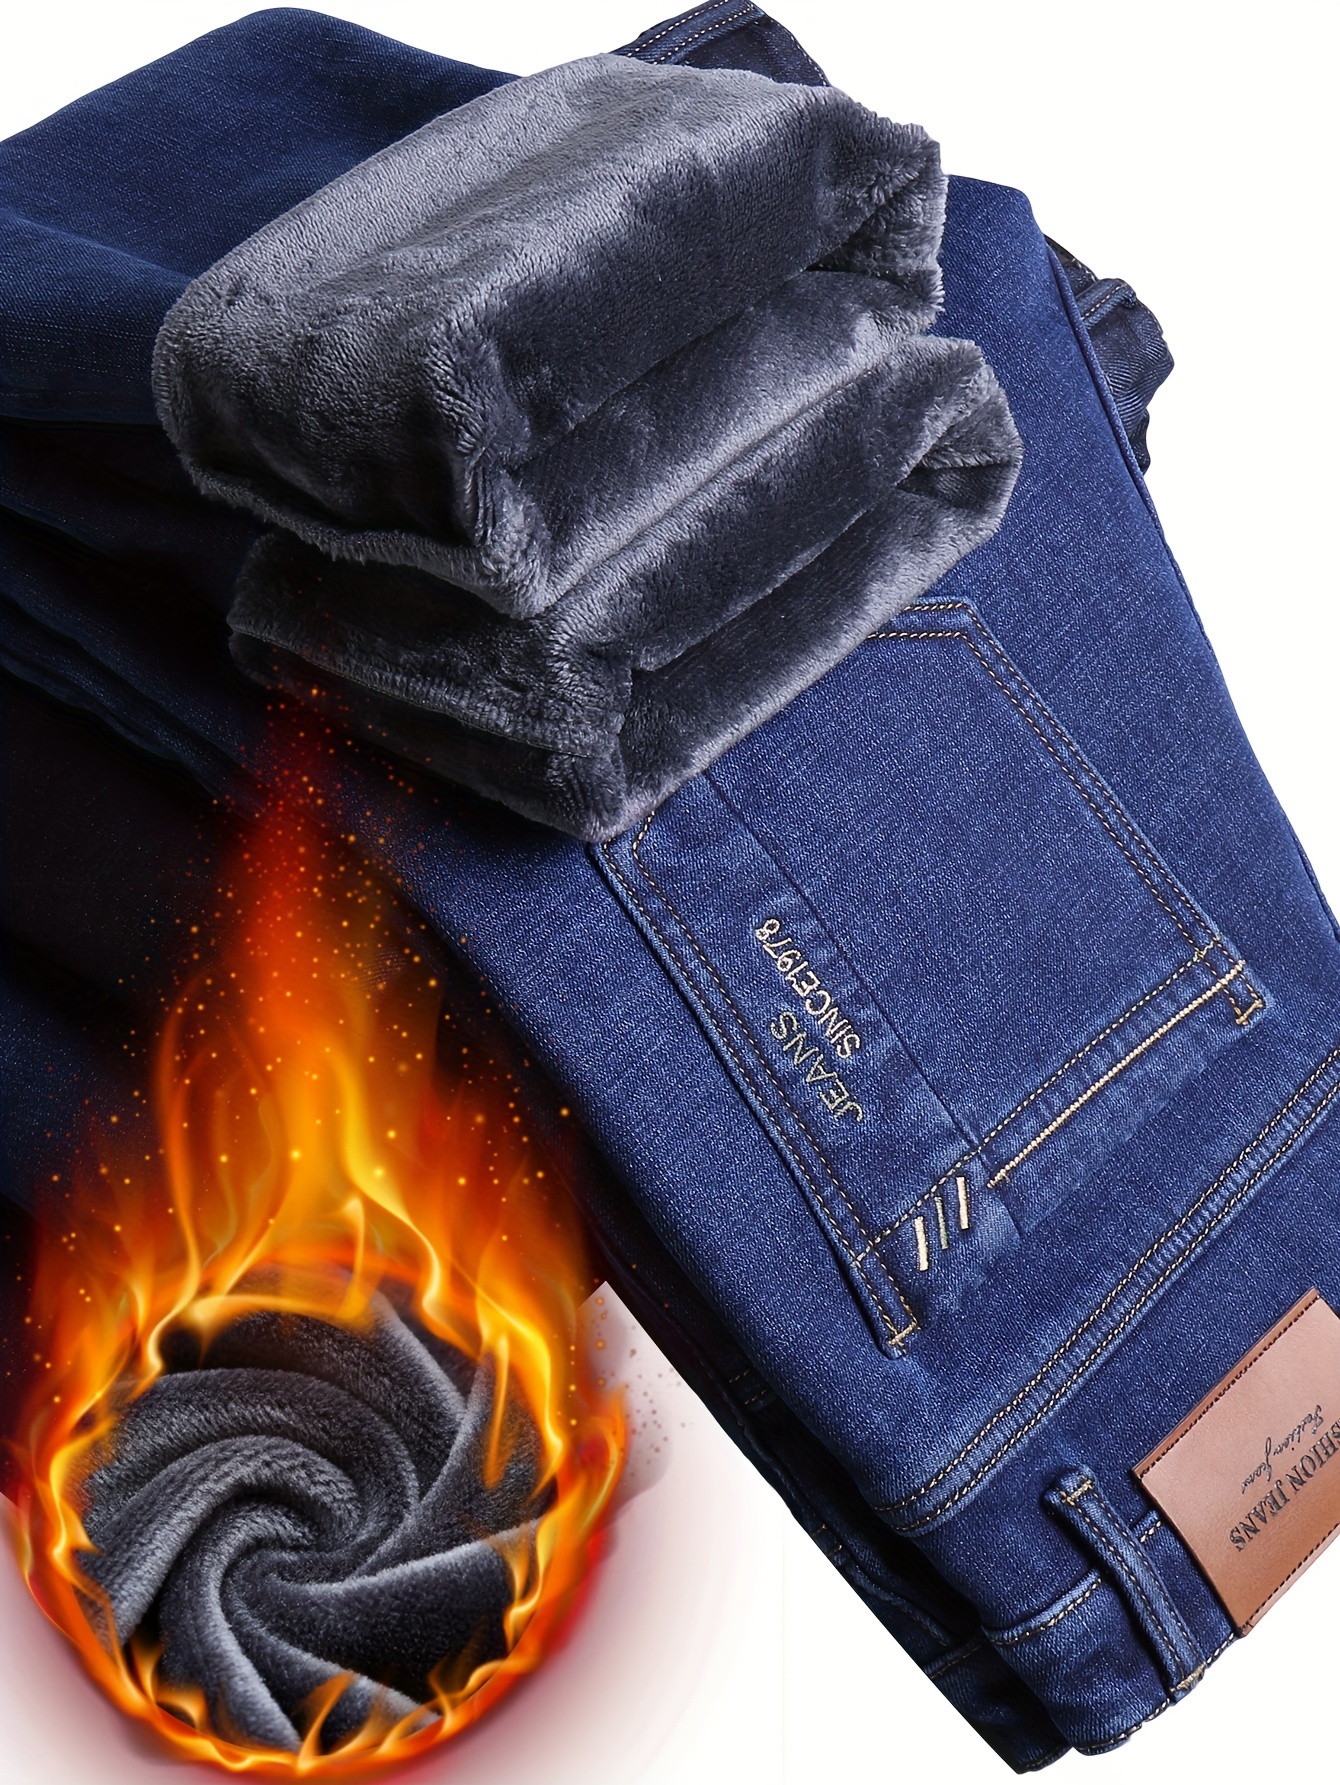 Men's Casual Warm Thick Jeans, Classic Design Pocket Jeans For Fall Winter  Outdoor